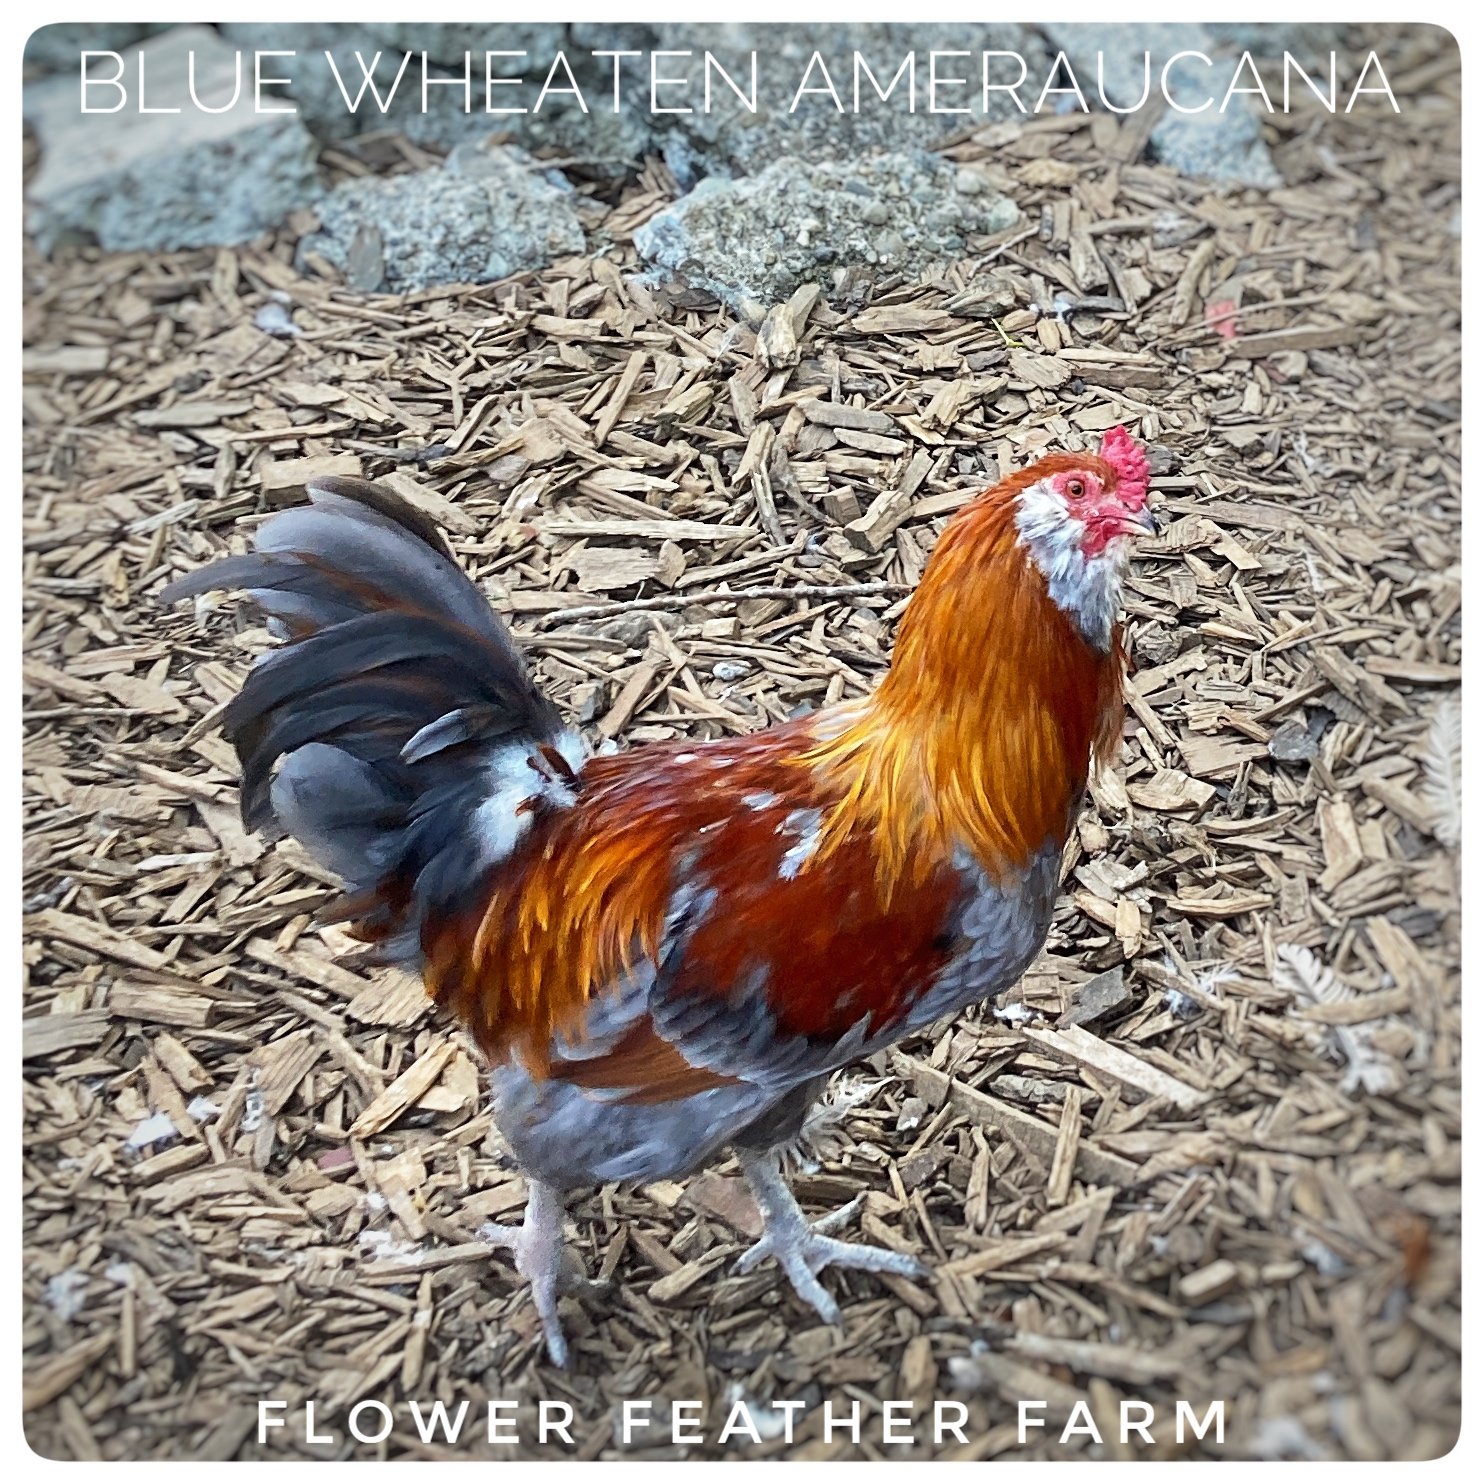 Blue Wheaten Ameraucana Rooster at Flower Feather Farm, chicks &amp; dahlias, a local chick hatchery